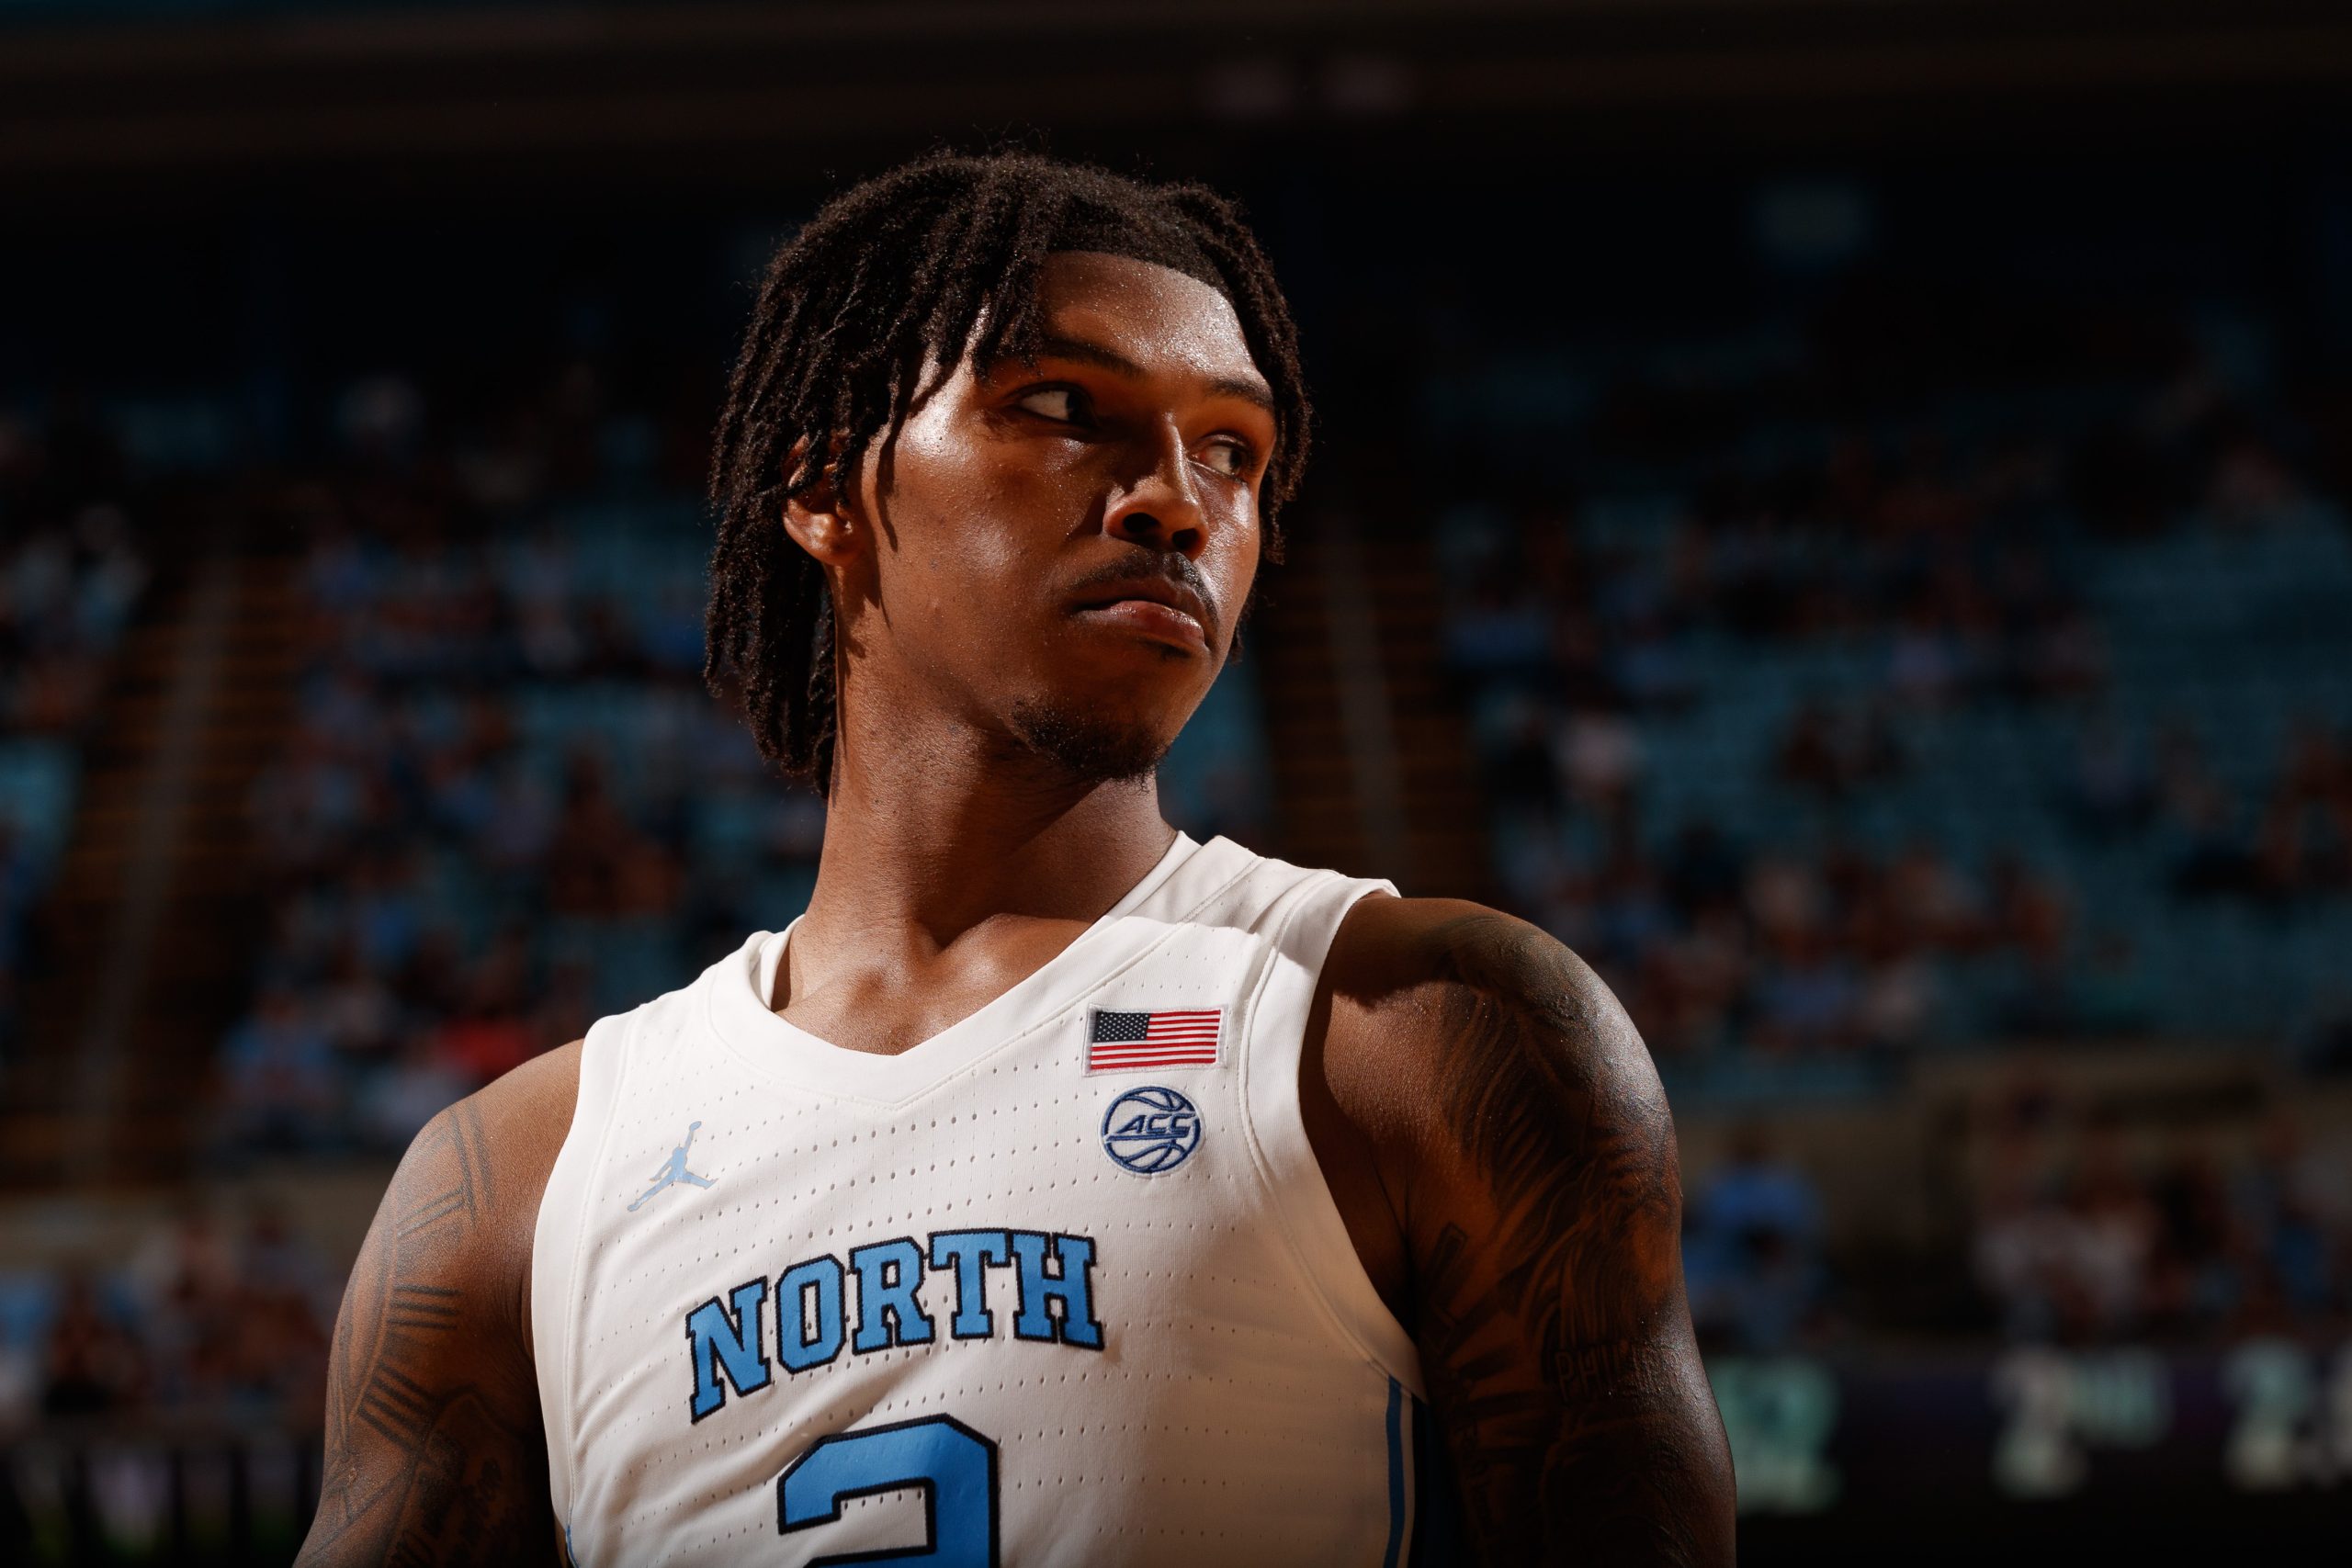 UNC Standout Caleb Love is Back Like He Never Left